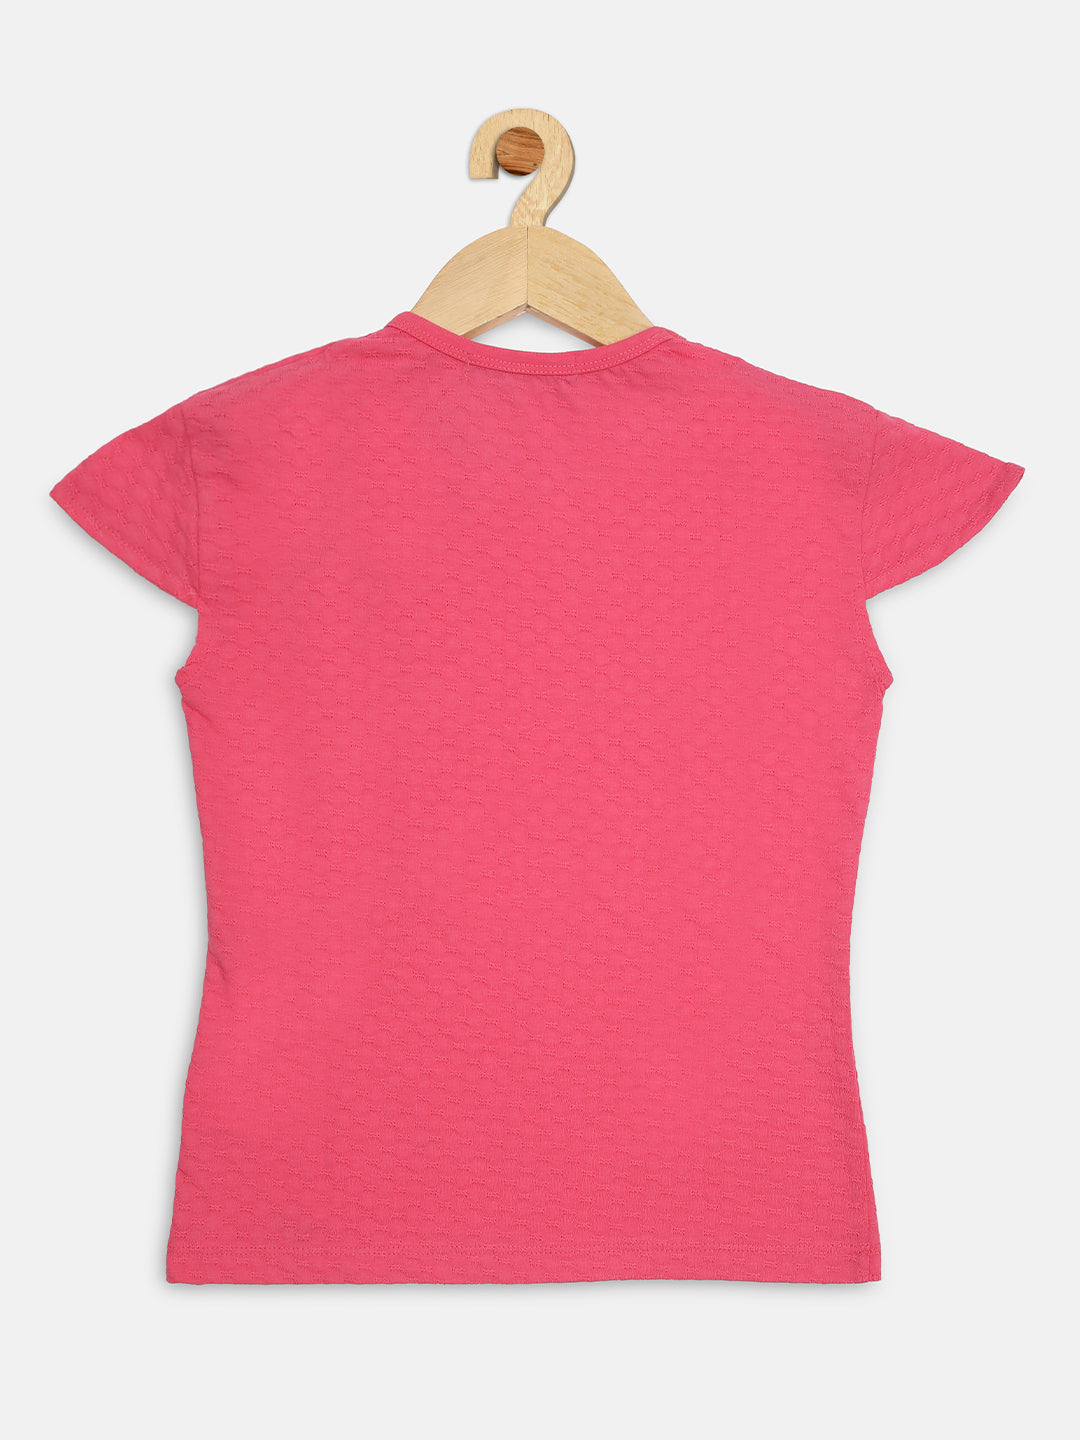 Pampolina Girls Solid Top With Puffed Sleeve -Pink